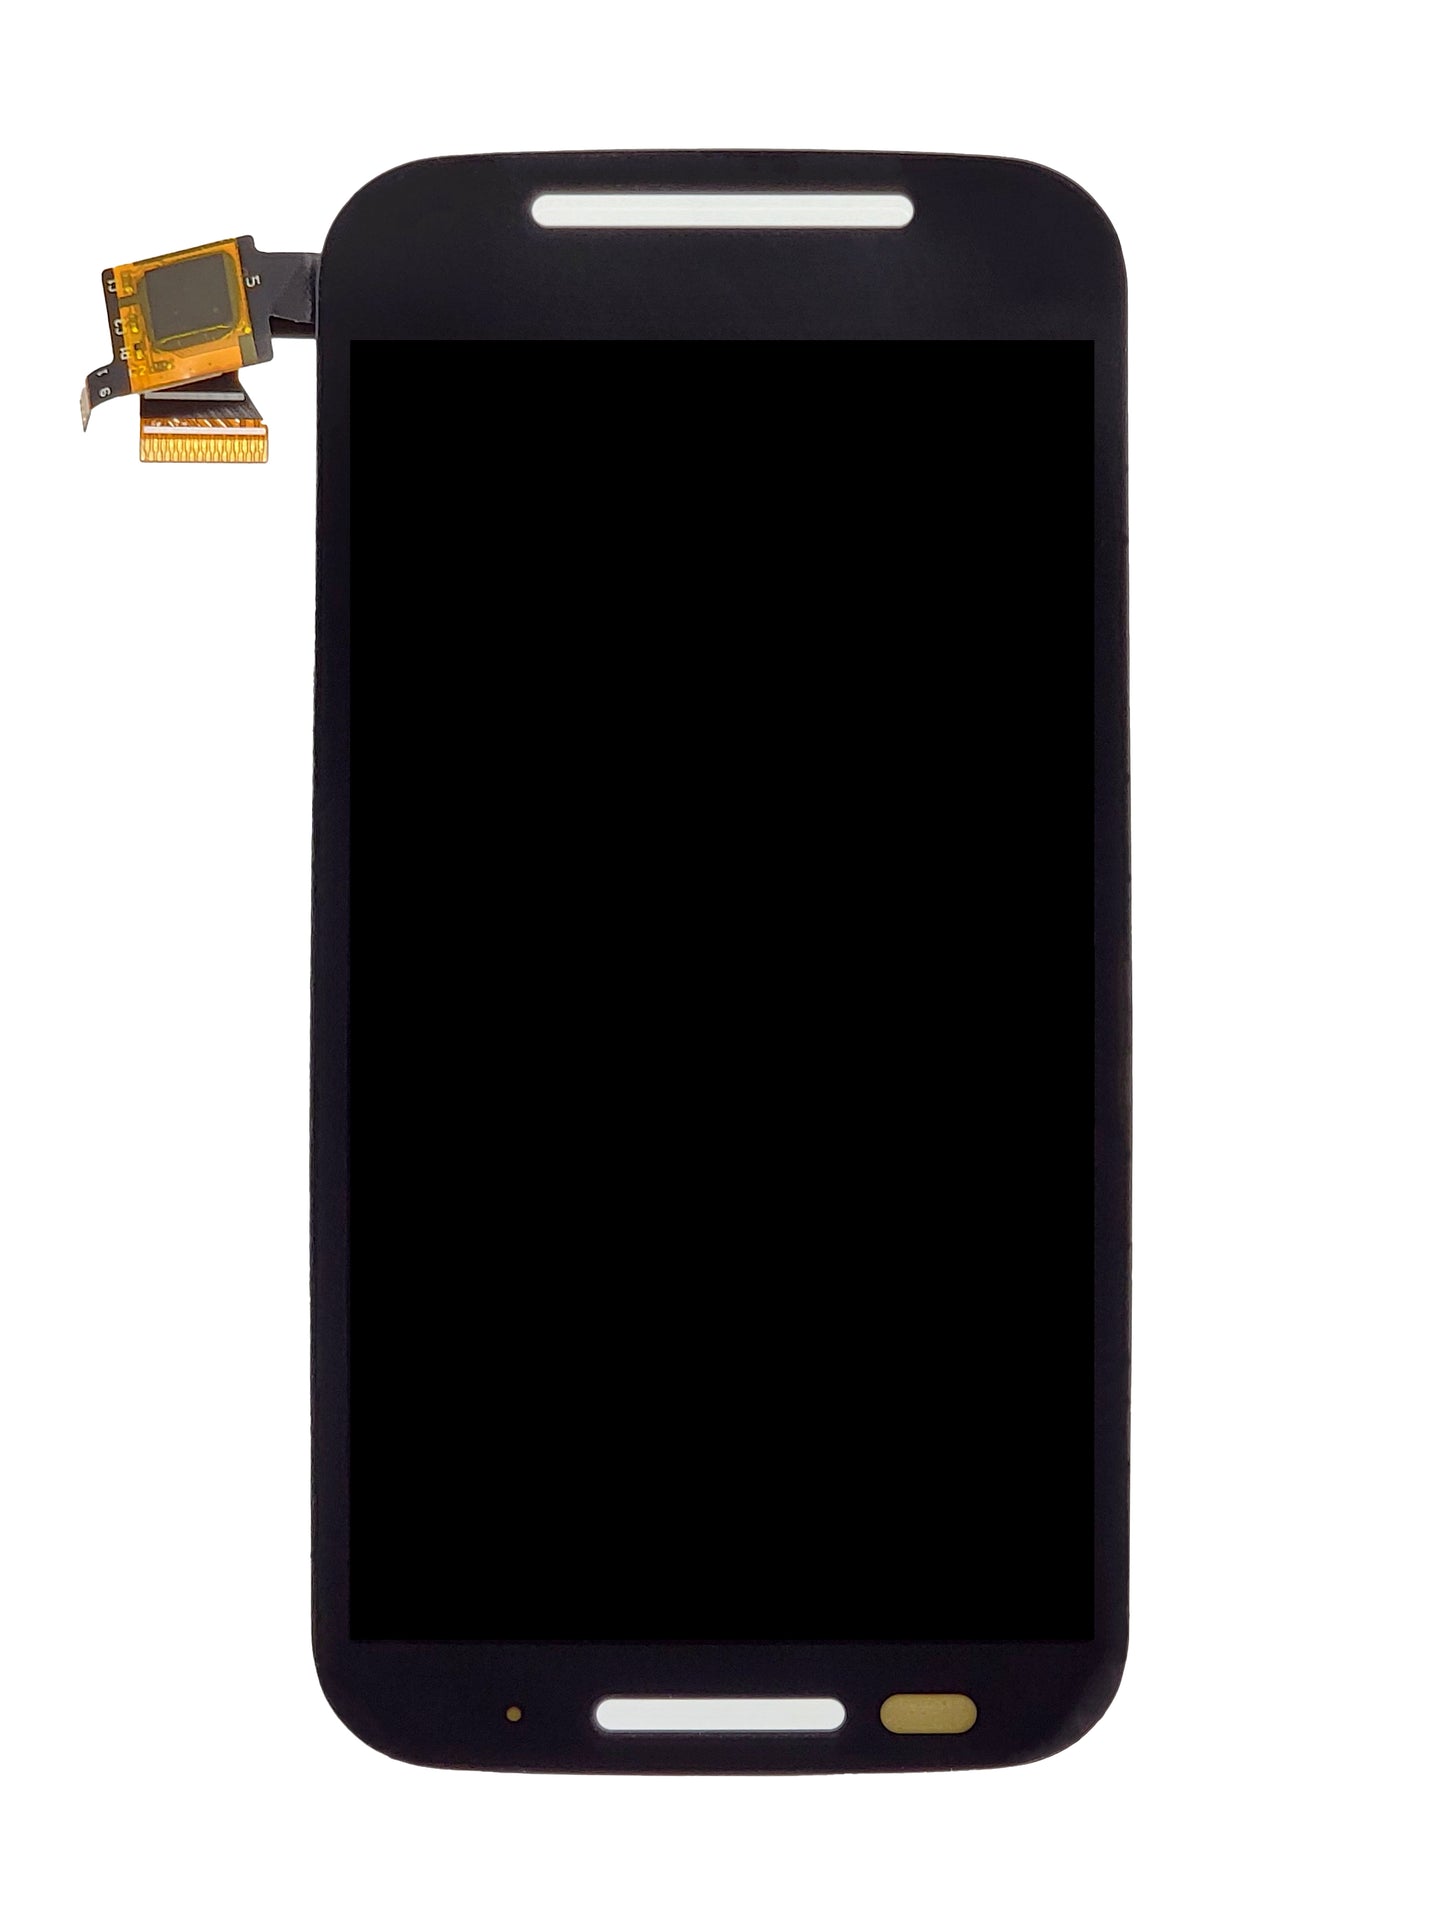 Moto E (XT1022) Screen Assembly (Without The Frame) (Refurbished) (Black)